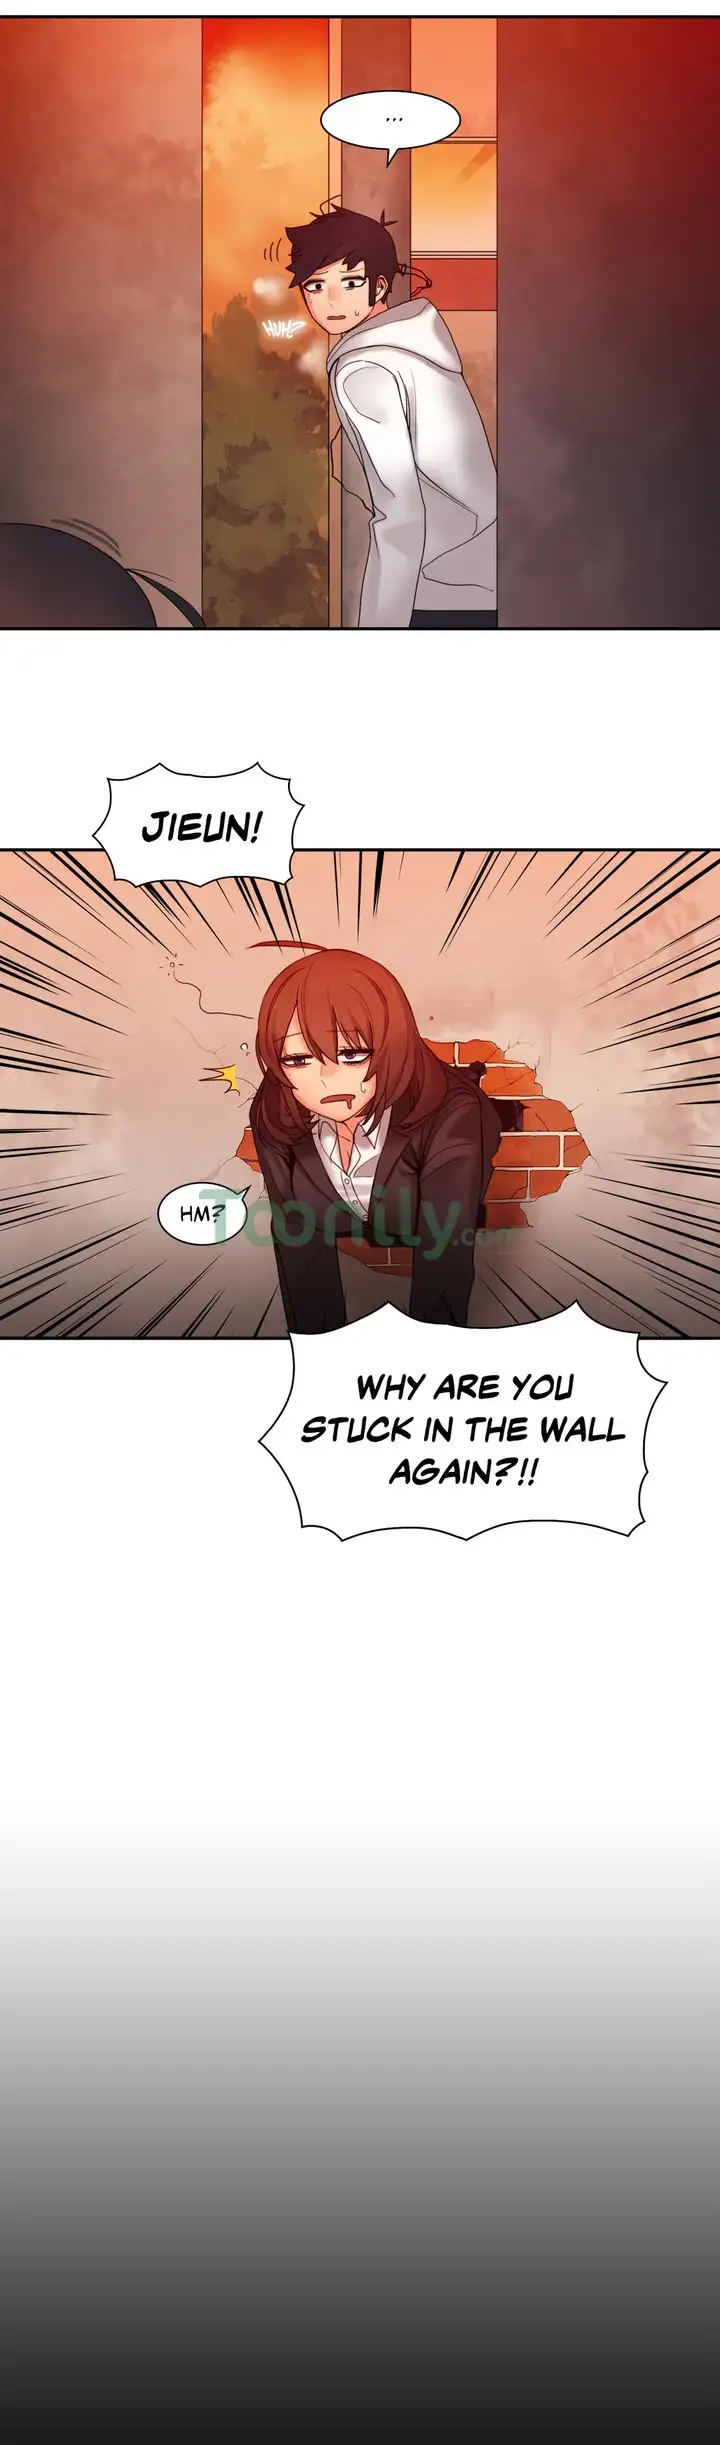 The Girl That Got Stuck in the Wall - Chapter 8 Page 12